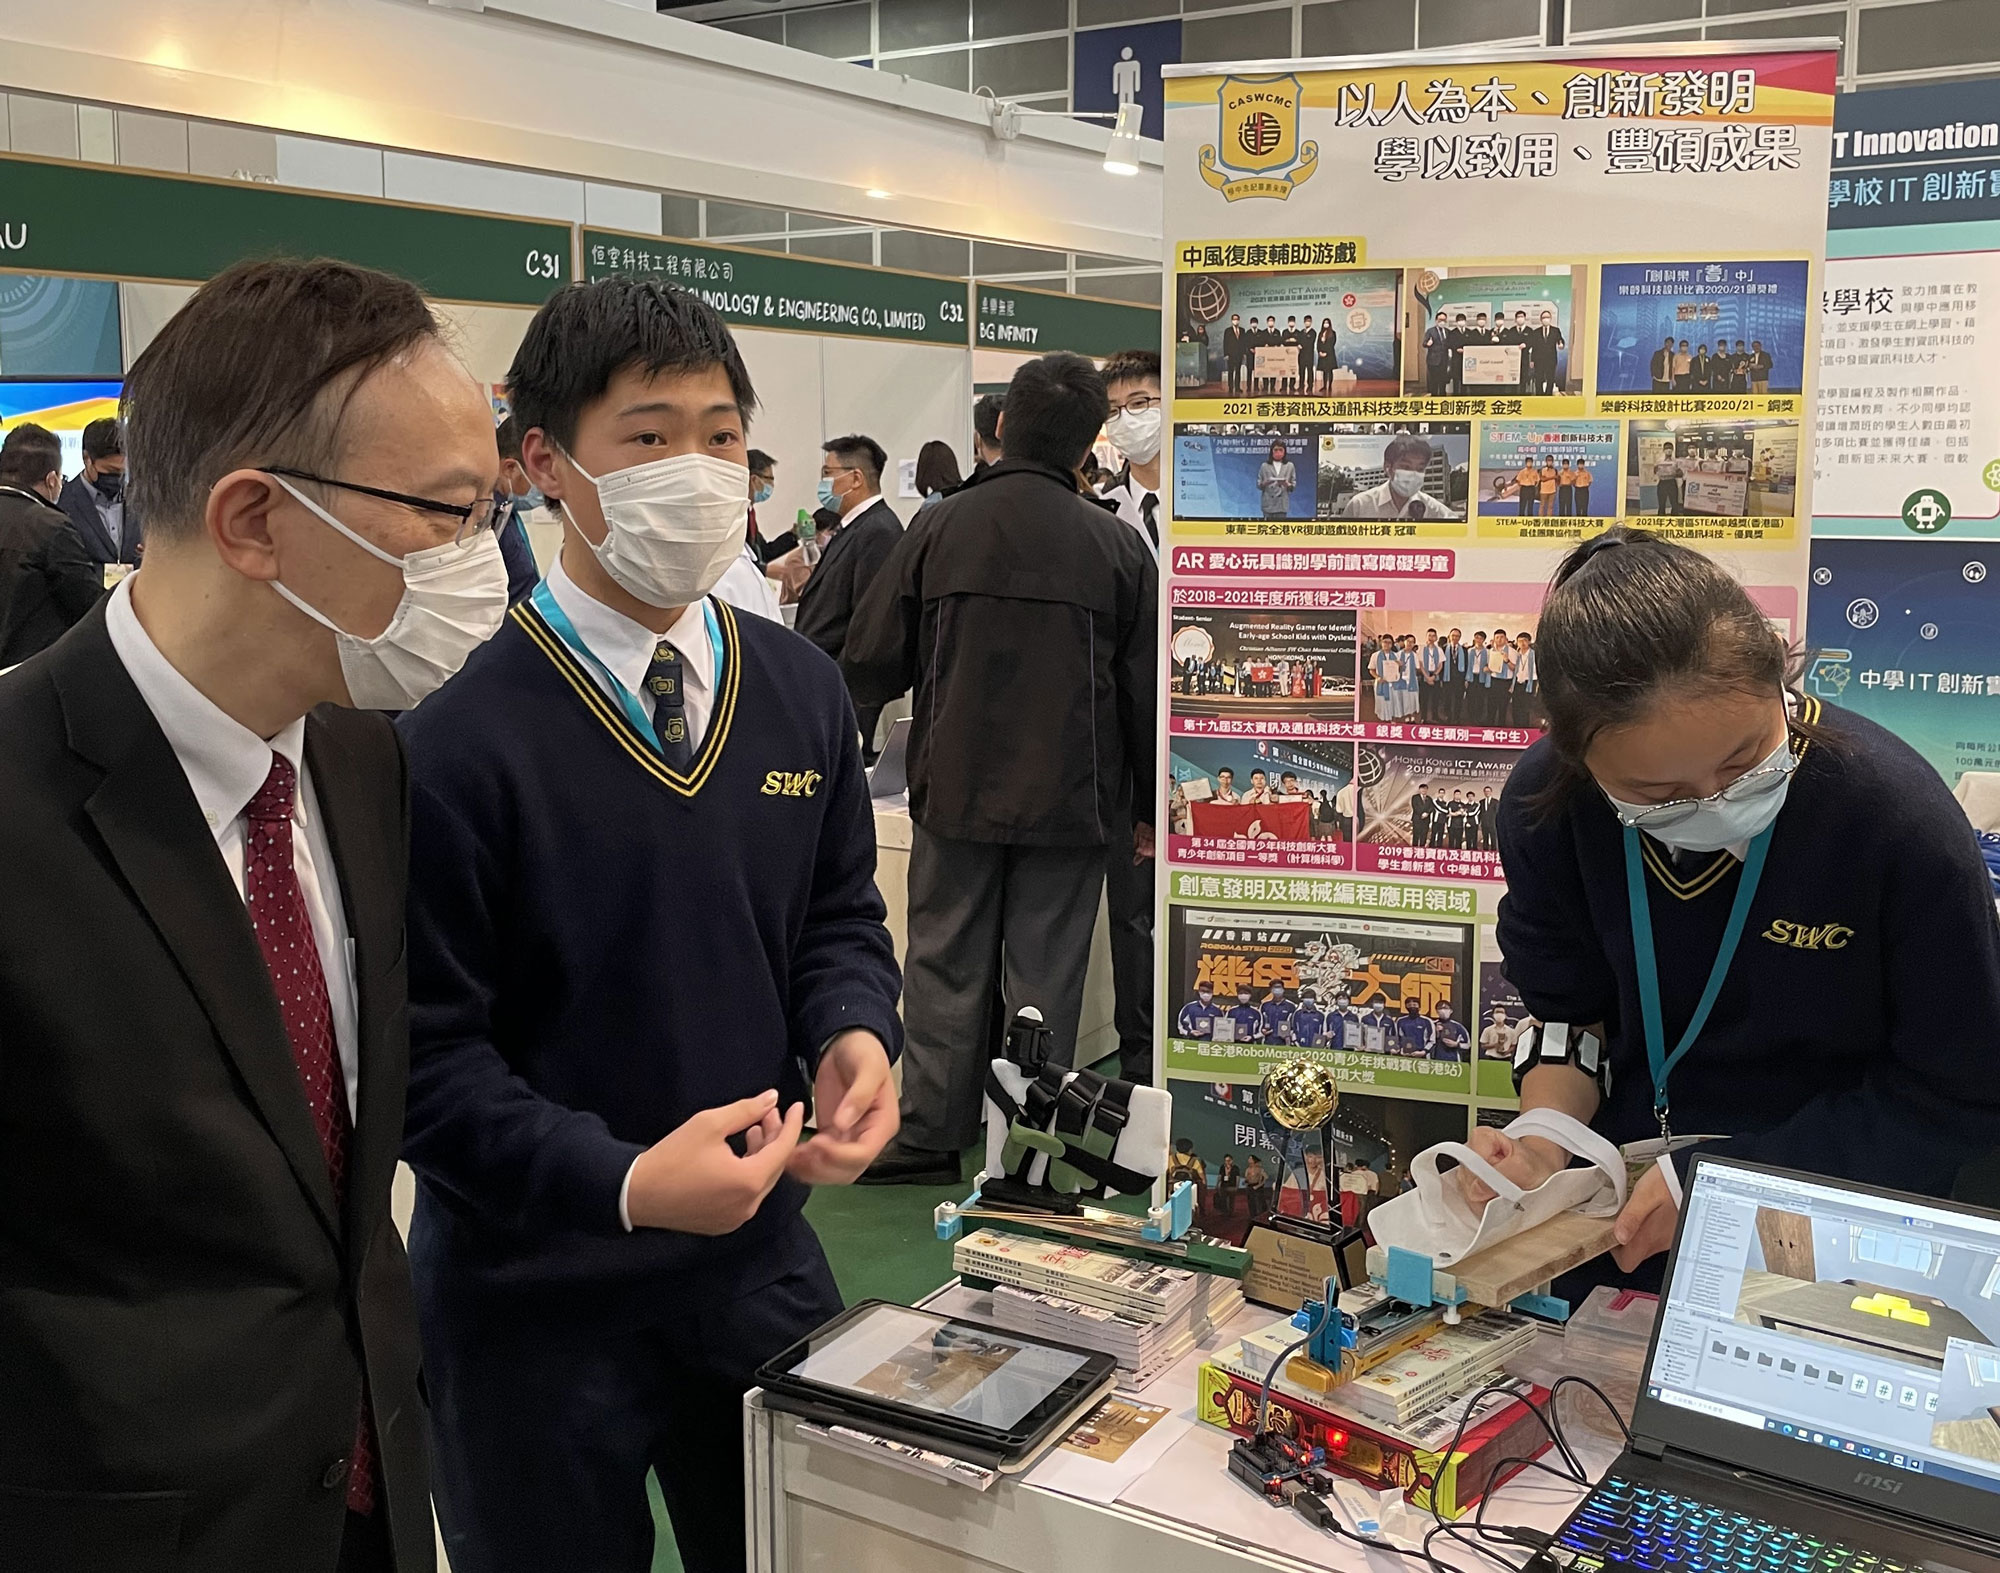 Christian Alliance SW Chan Memorial College demonstrated their “Auxiliary Game for Stroke – Rehabilitation” which won the Gold Award of the Hong Kong ICT Awards 2021 Student Innovation (Senior Secondary) Awards, the Champion of the 全港VR復康遊戲設計比賽, the Bronze Award of the HKHS Gerontech Competition 2020/21 (Secondary School Category), the Merit Award of the Greater Bay Area STEM Excellence Award 2021 (Hong Kong), and the 高中組最佳團隊協作獎 of the STEM-Up HK Innovation and Technology Competition.